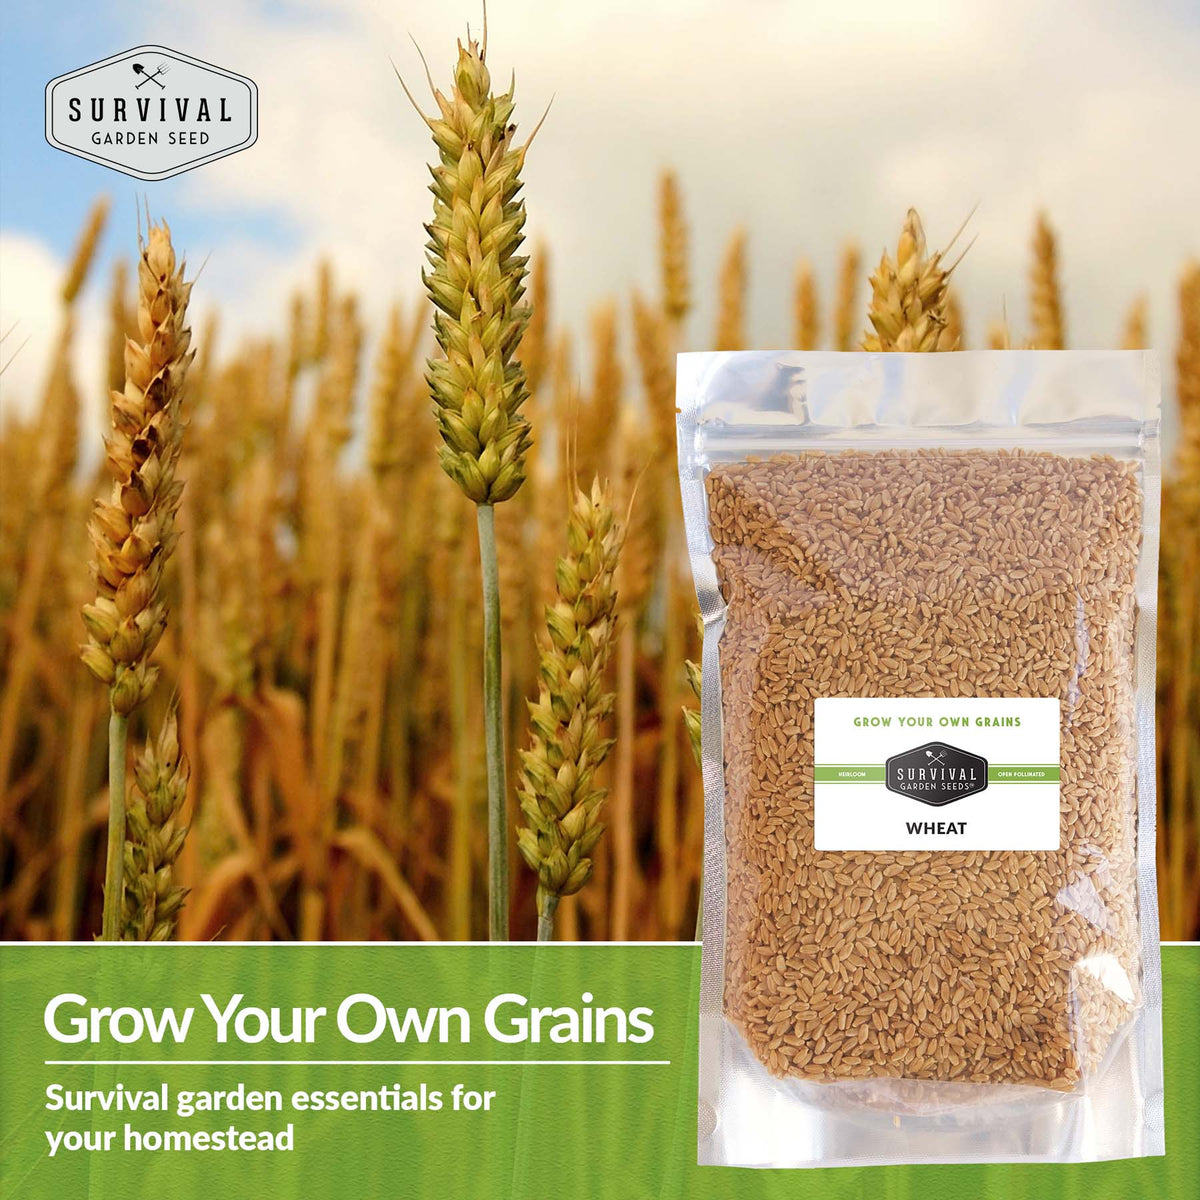 Wheat seed lets you grow your own grains